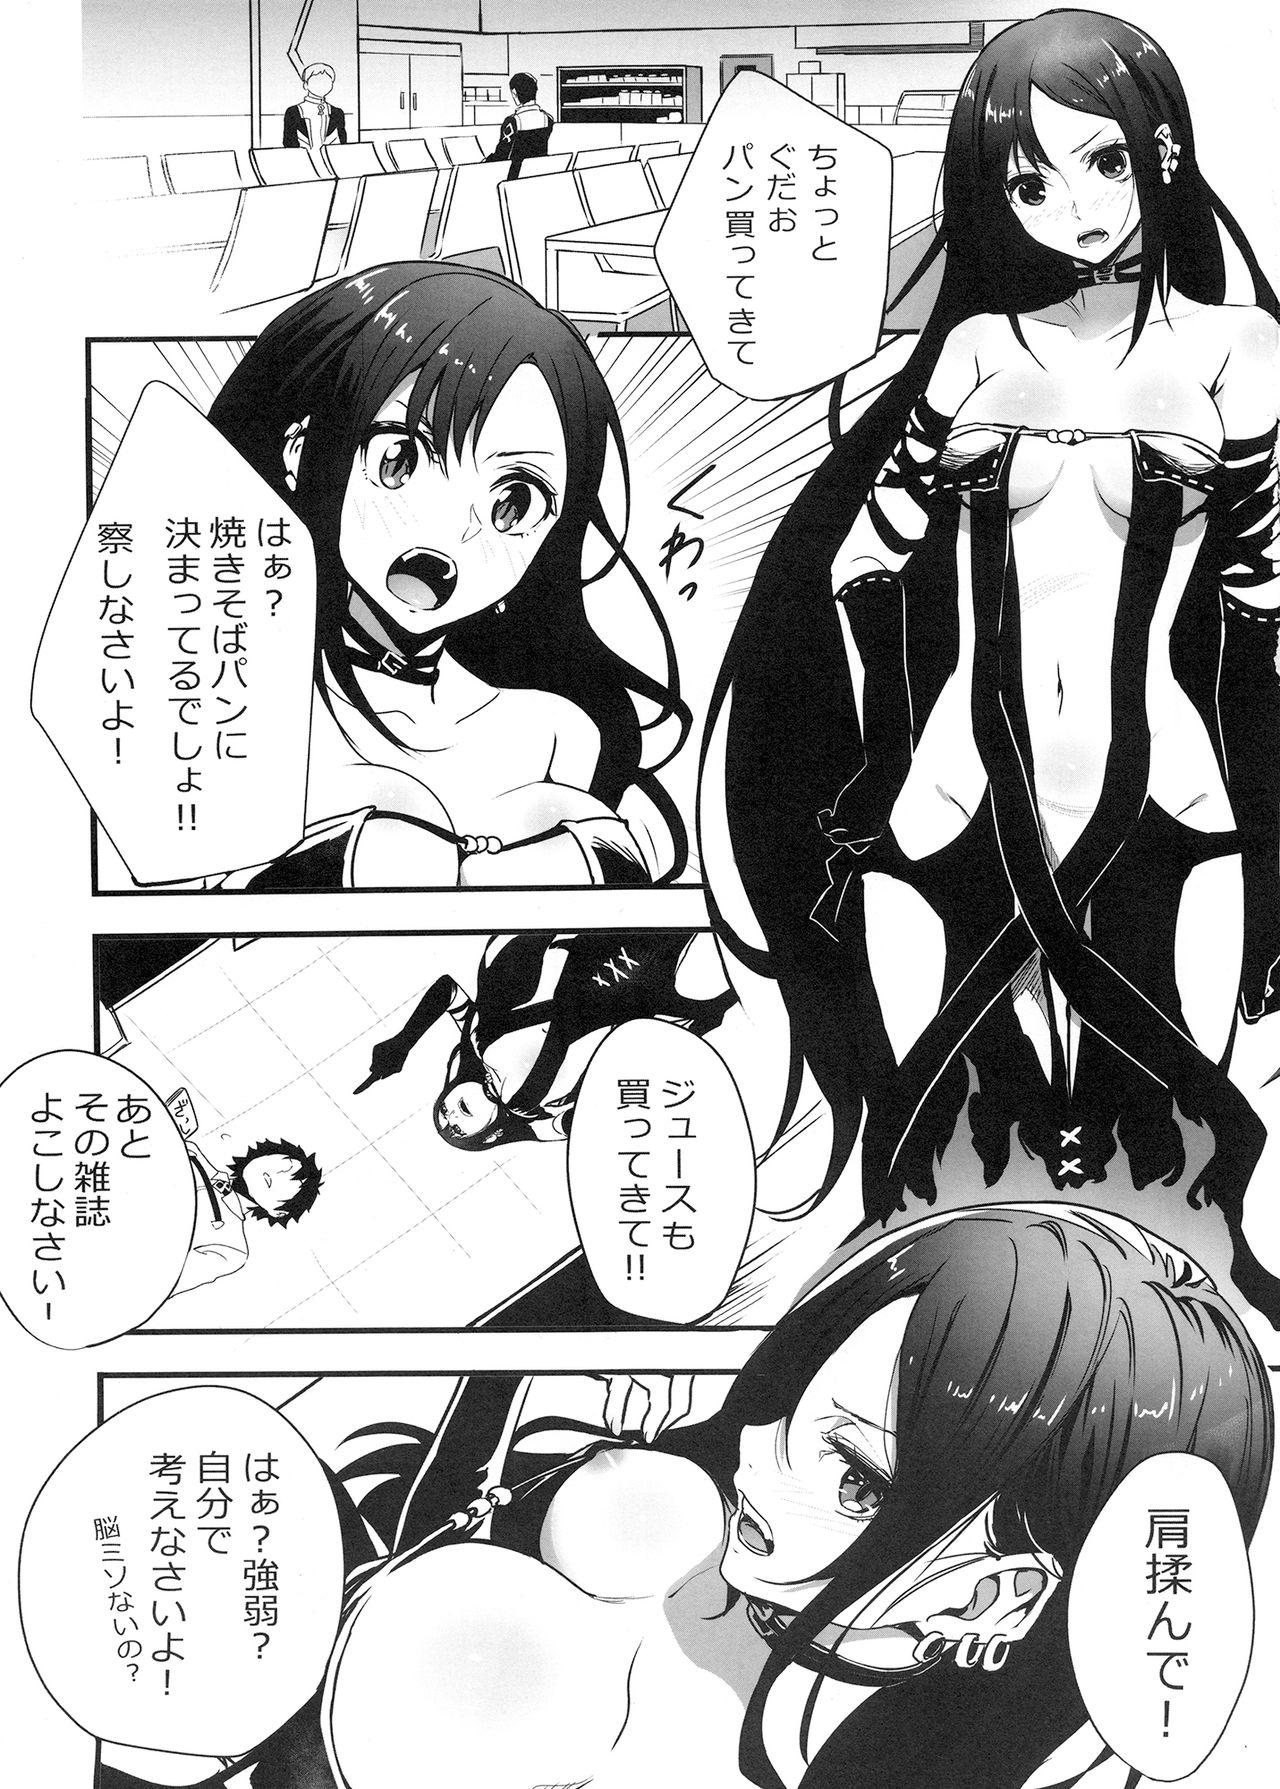 Hot Mom Gubijin-san to Himegoto - Fate grand order Mexicano - Page 2